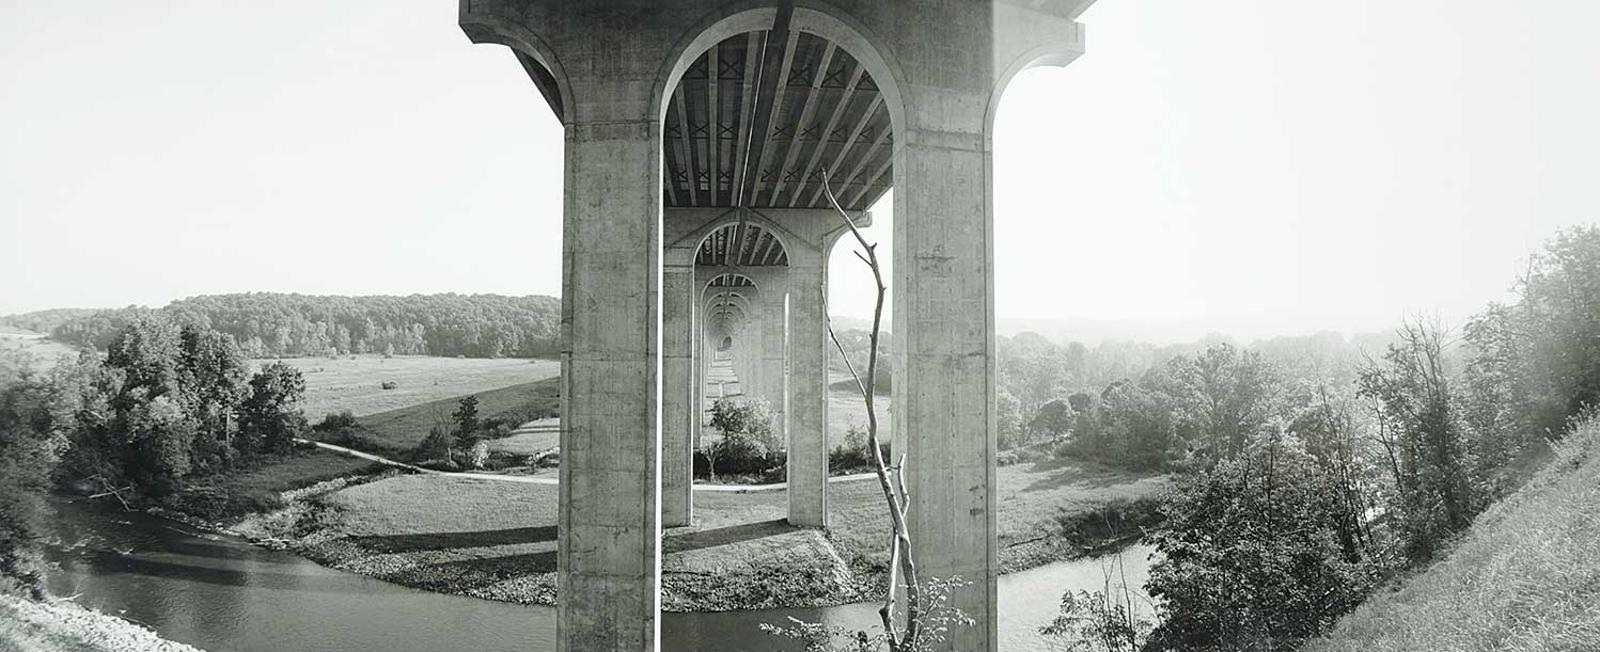 Geoffrey James (1942) - Interstate 80 and the Cuyahoga National Park [Viaduct of the Ohio Turnpike]